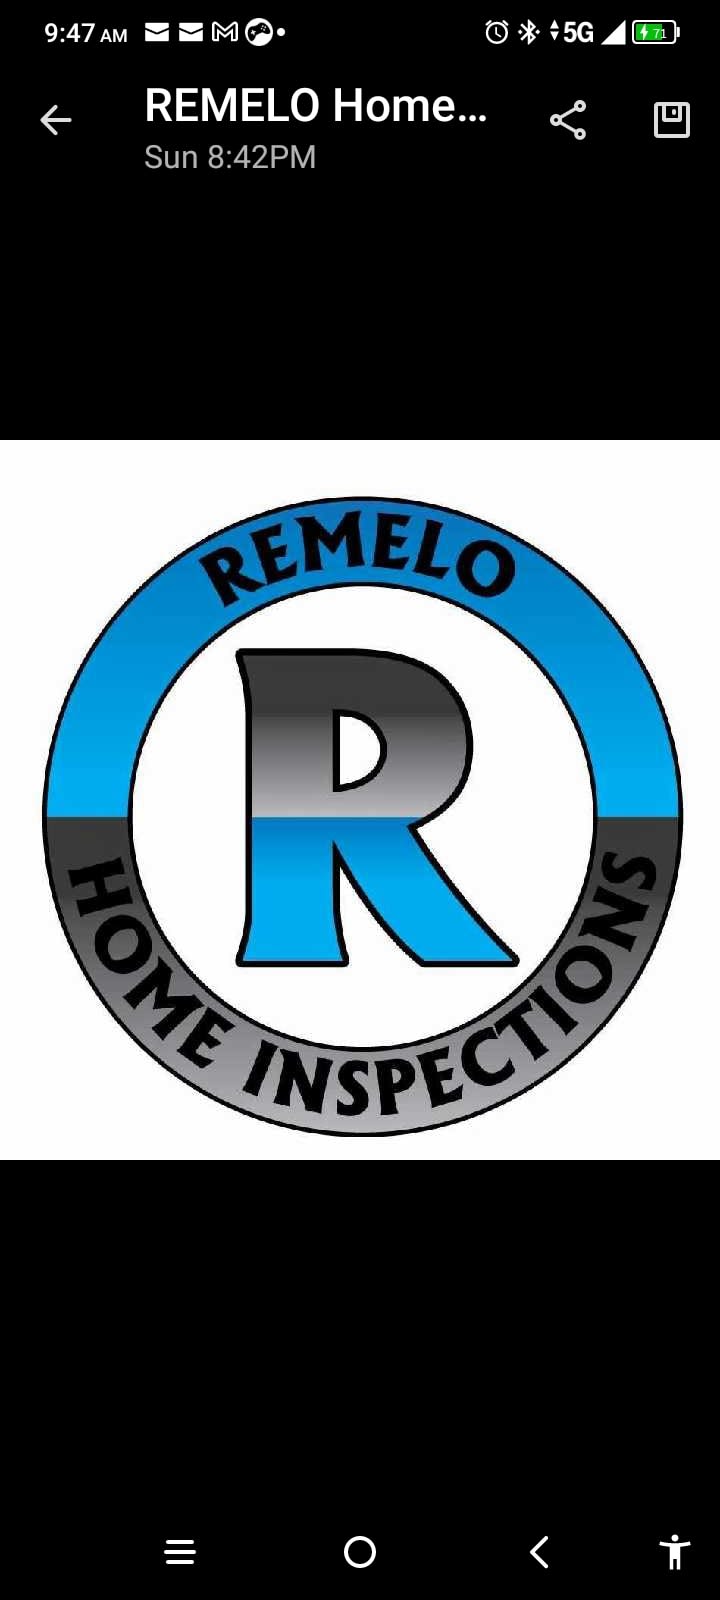 Remelo Home Inspections